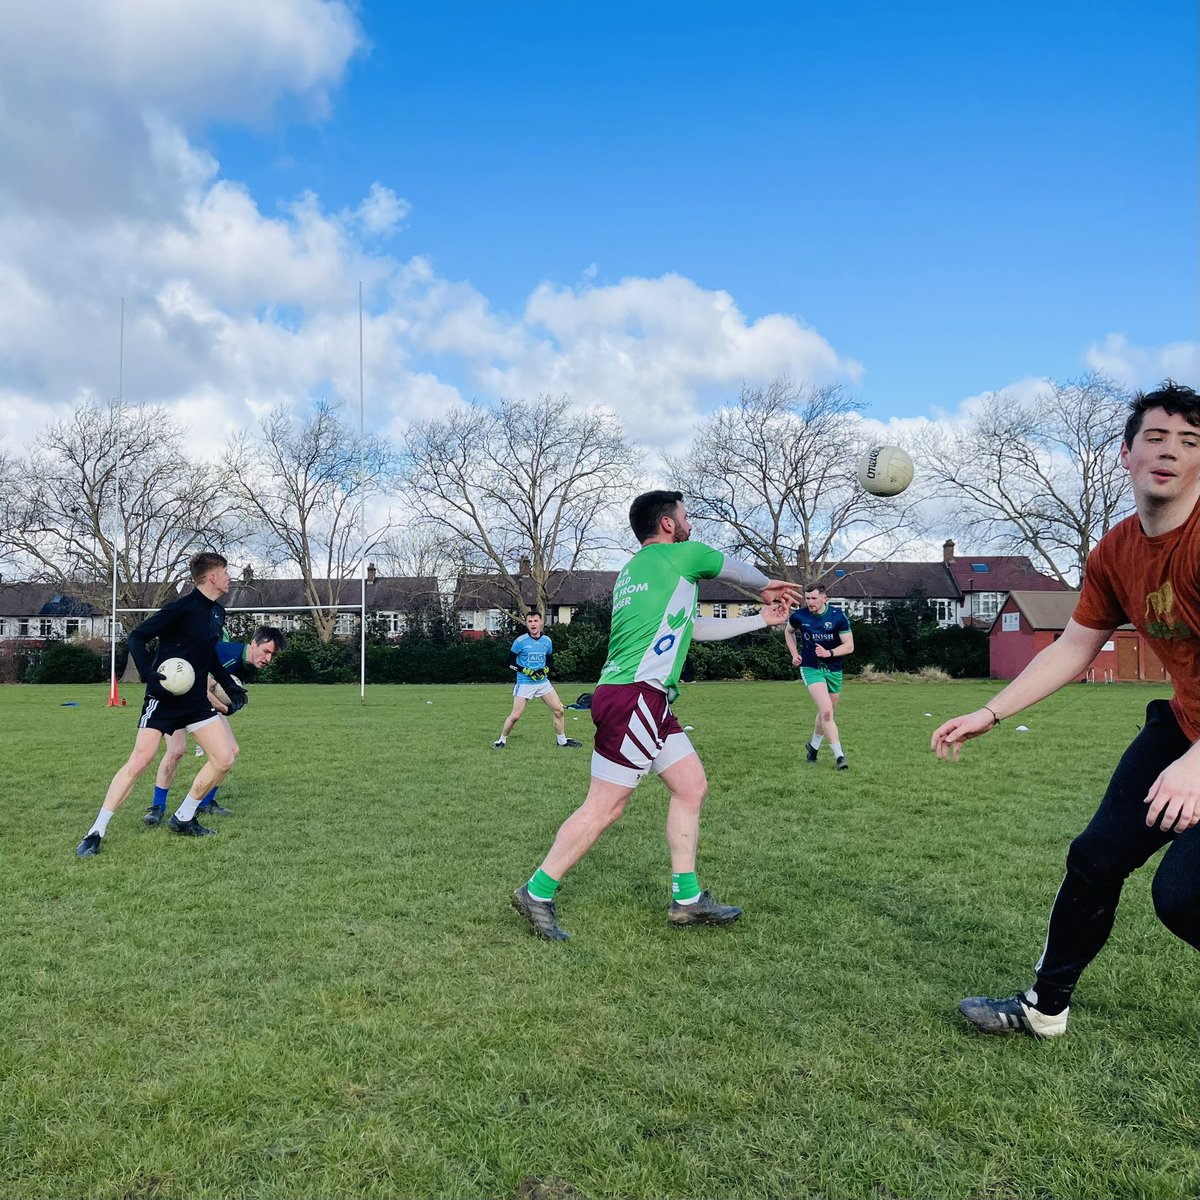 Good sharp session this morning. Drop us a DM if you’re in North London and fancy playing some ball. #GAA #IrishinLondon